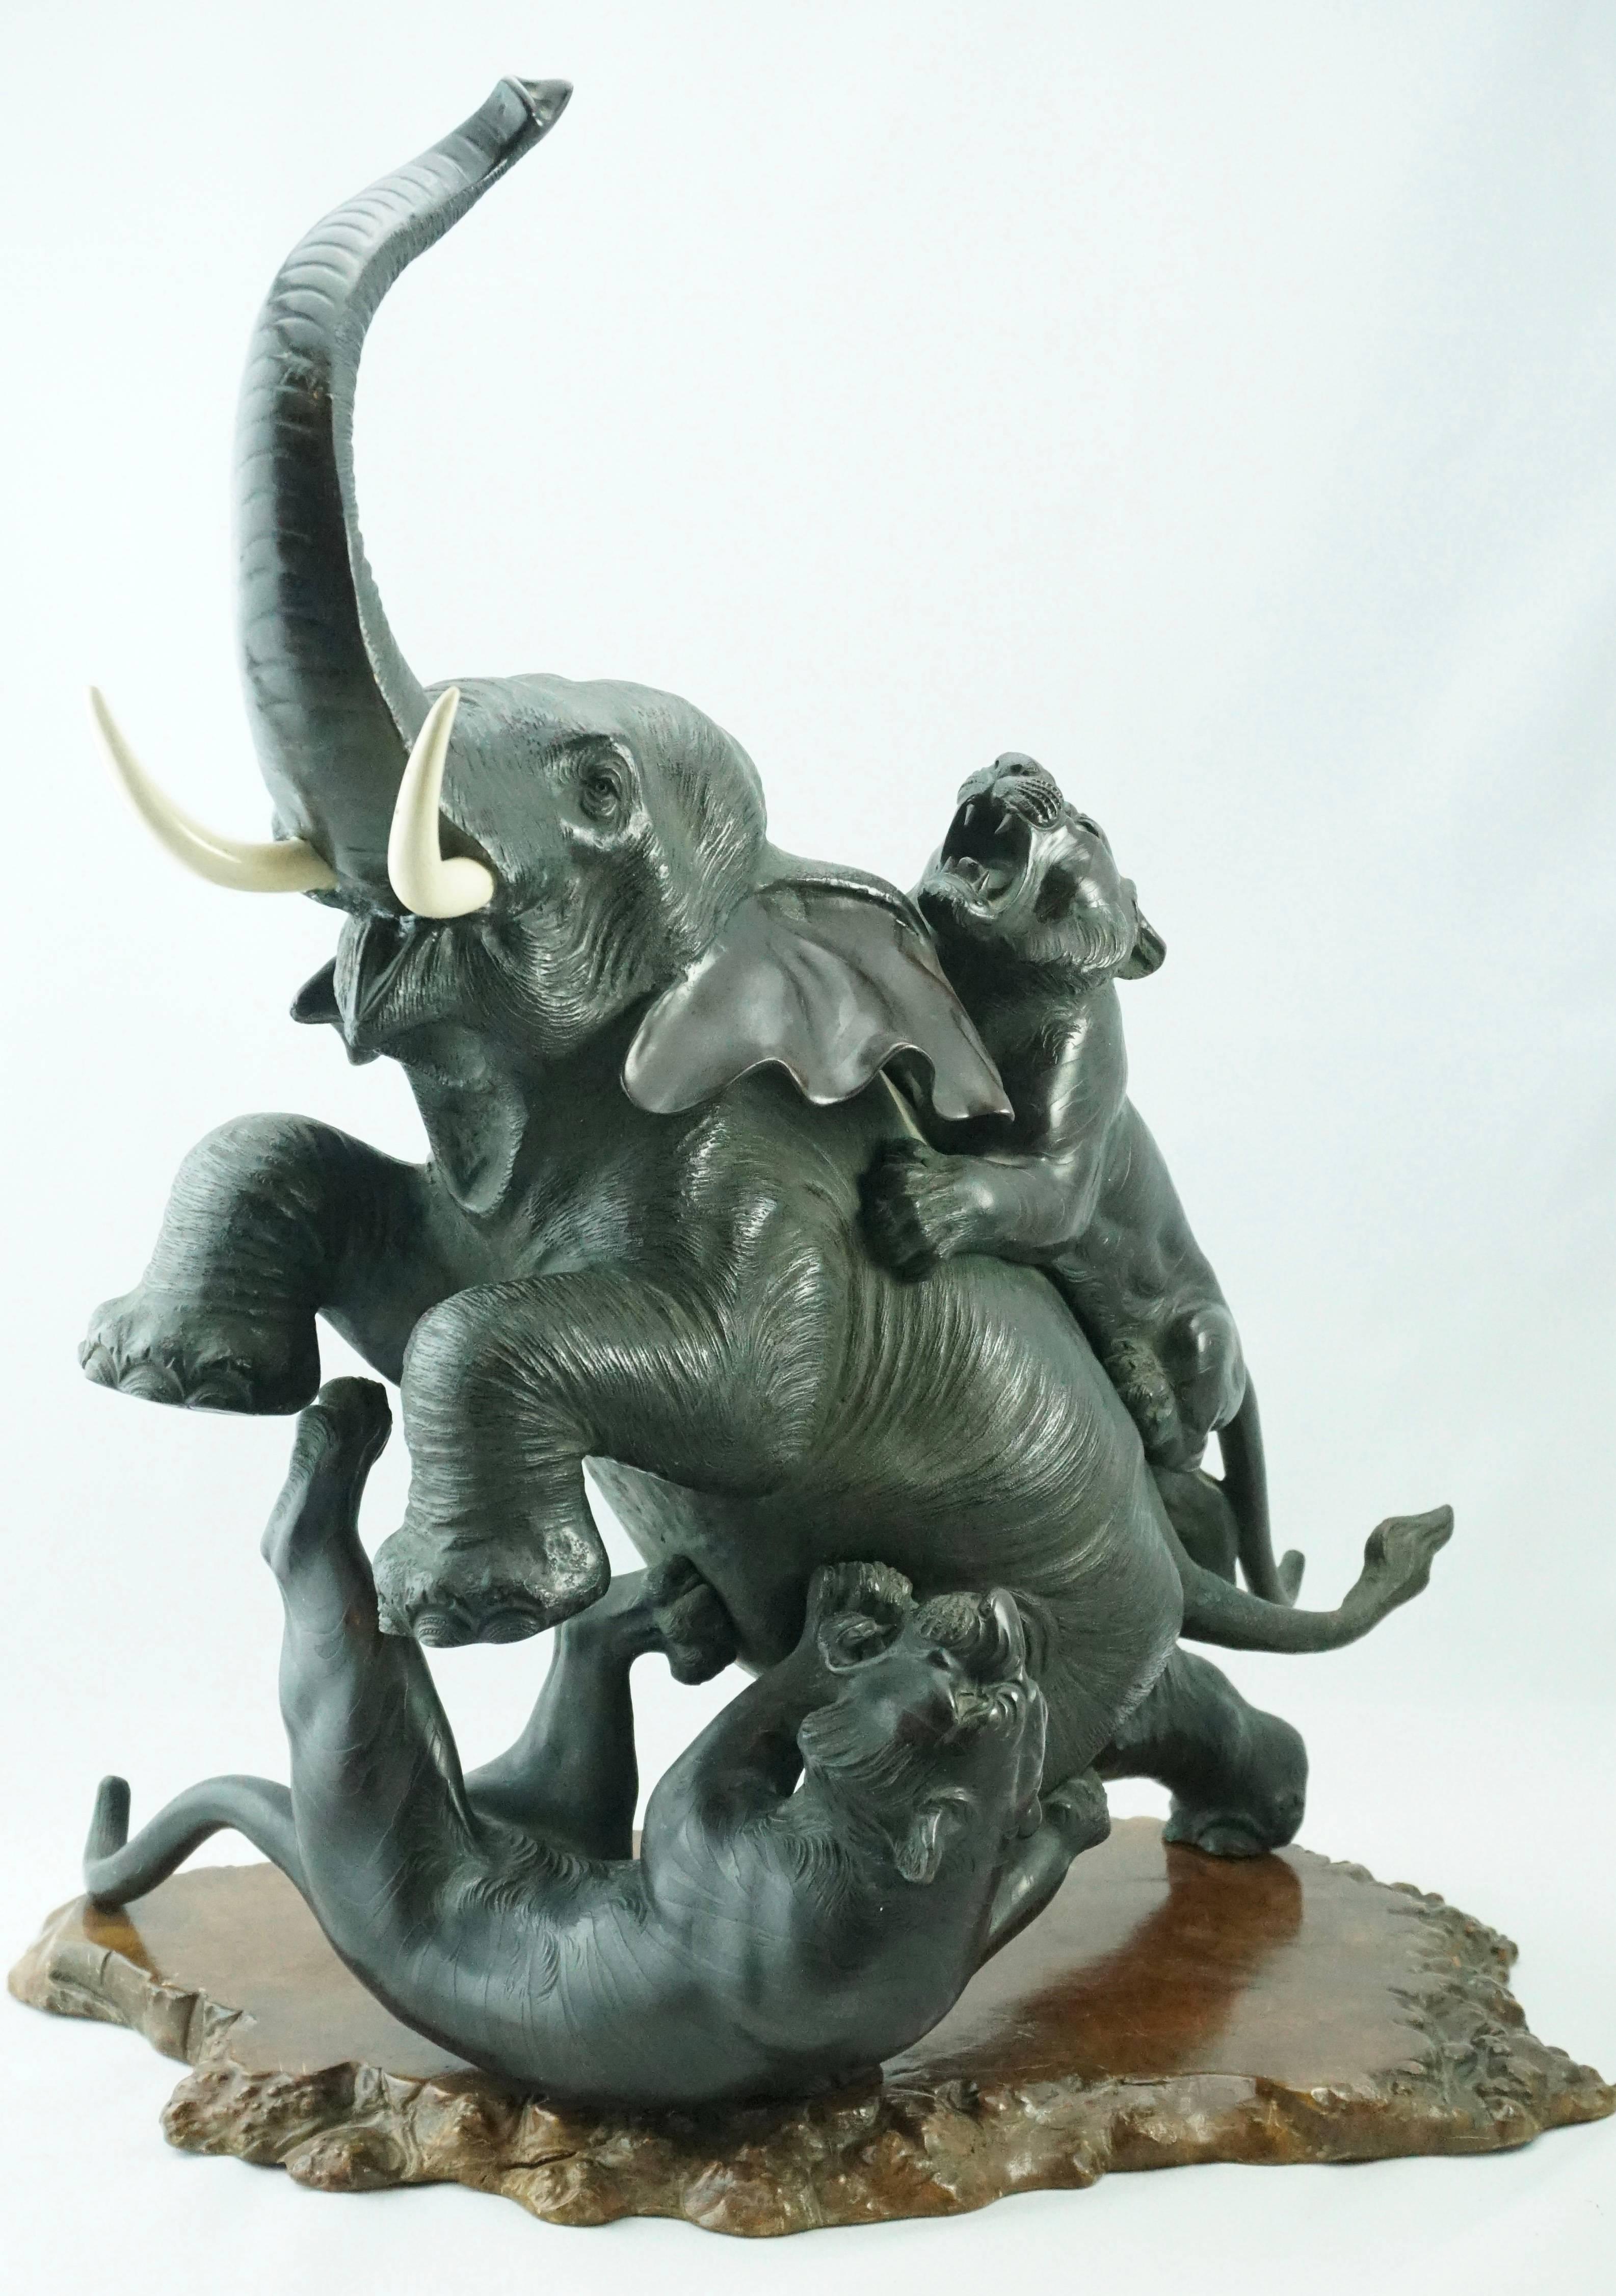 Japanese Meiji Genryusai Seiya bronze elephant and tigers, circa 1890.

This moving and detailed bronze grouping depicts a savage attack by two viscous tigers on an Asian male elephant that refuses to go down without a fight. The hand chiseling on